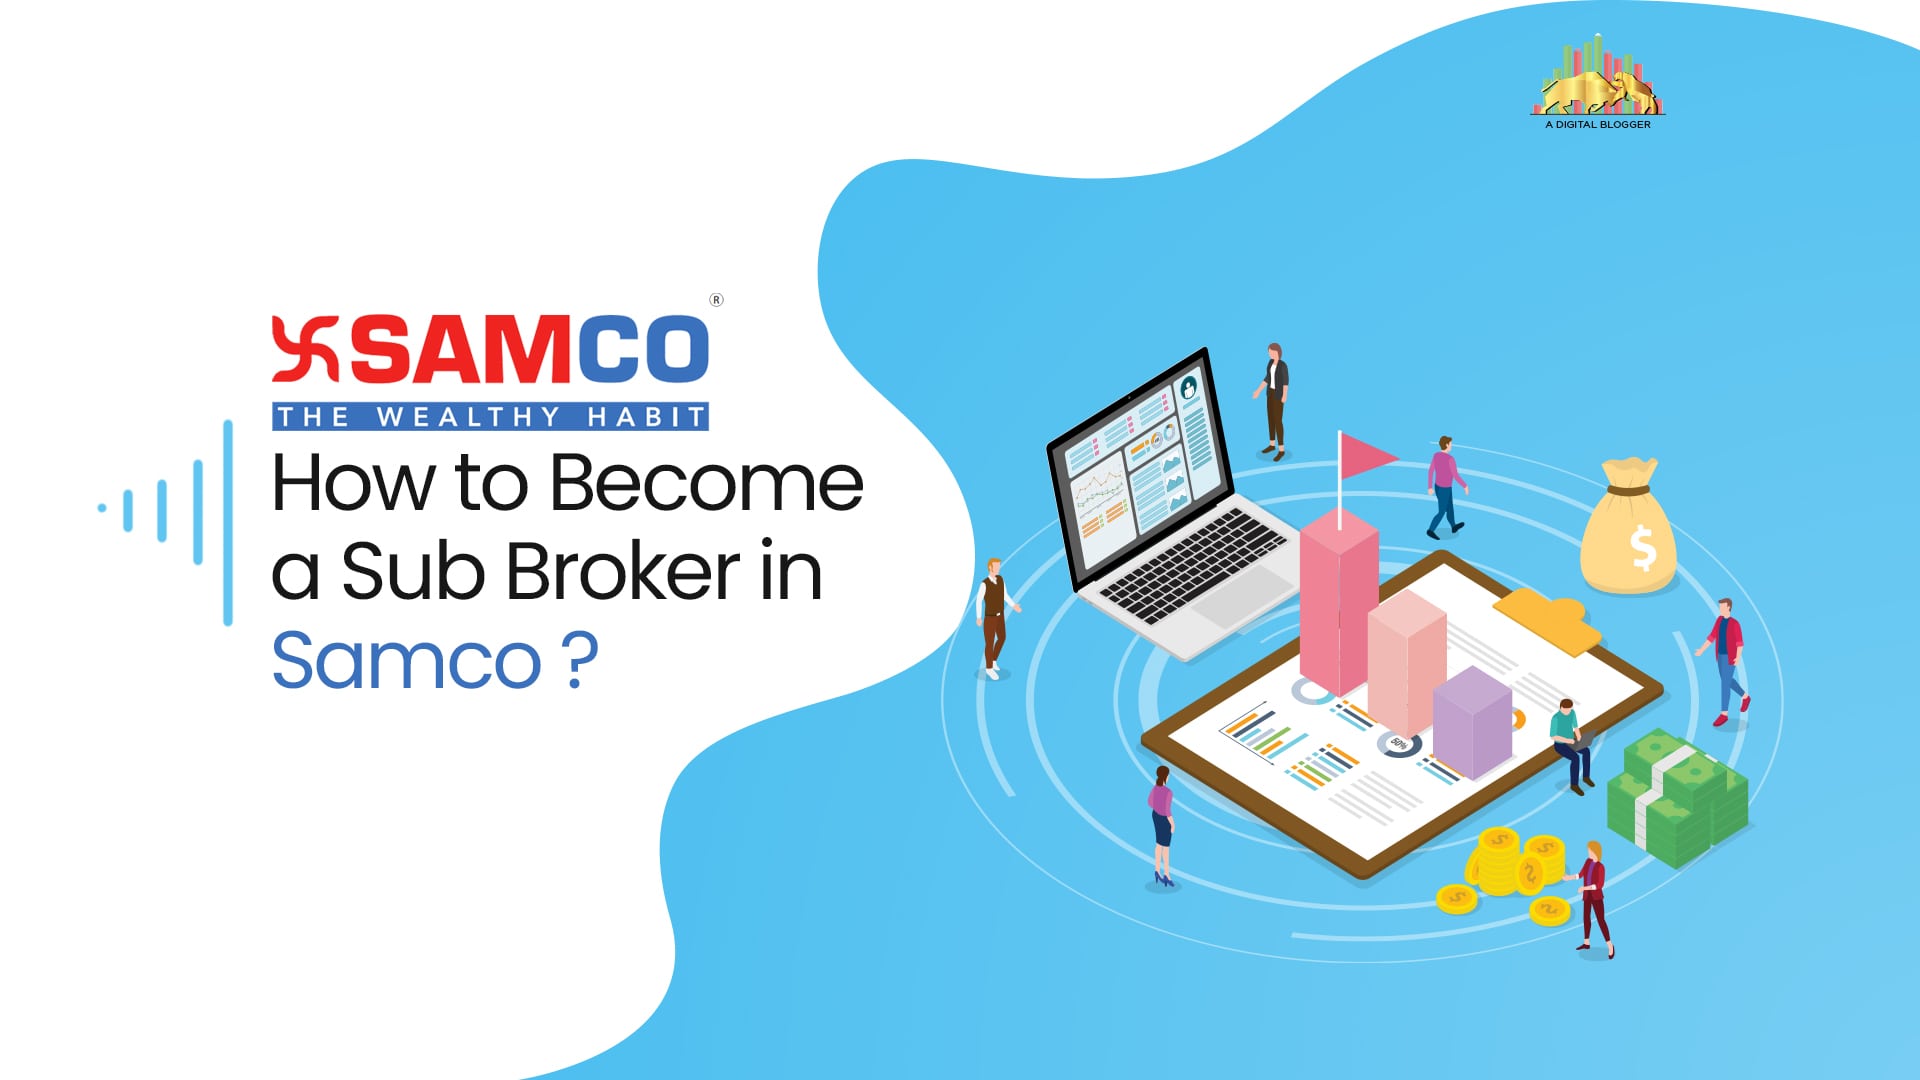 How to Become a Sub Broker in Samco